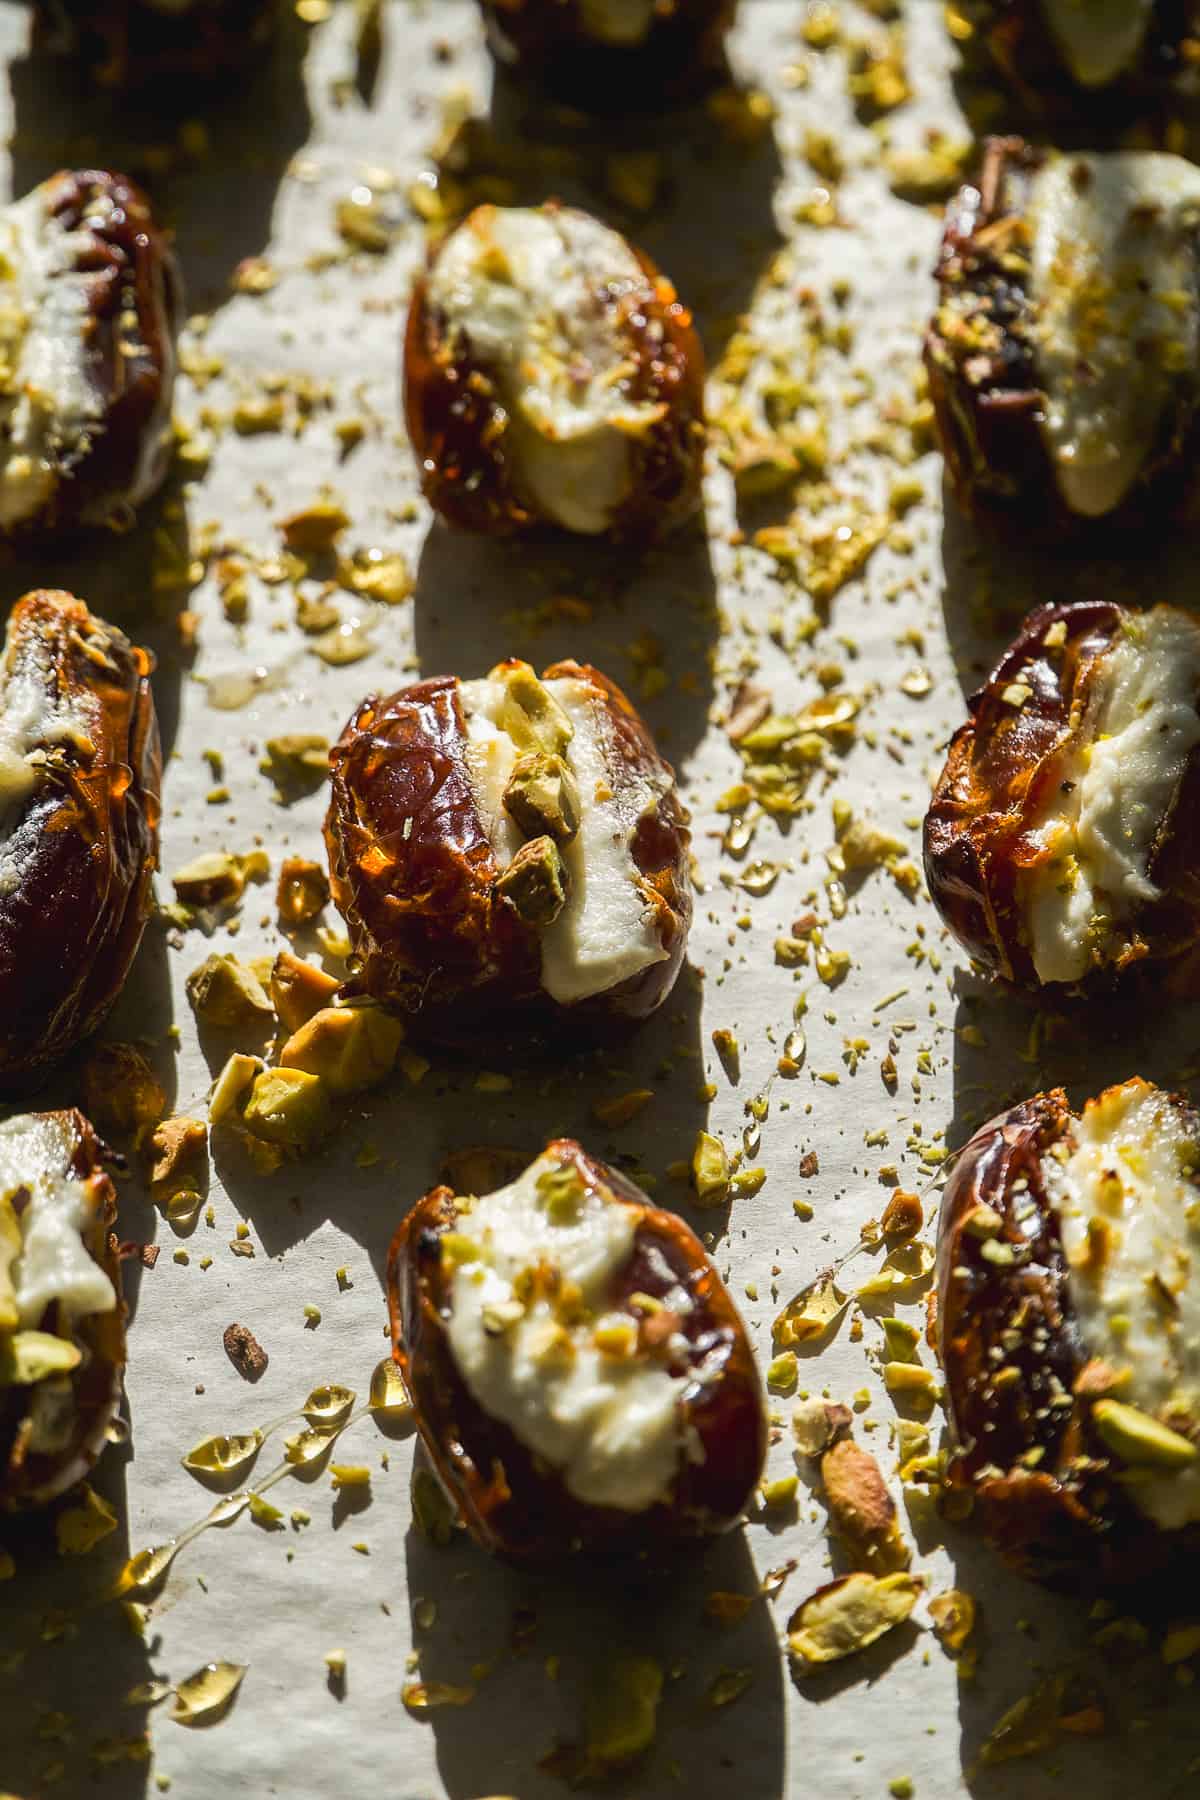 Goat cheese filled dates with pistachios.